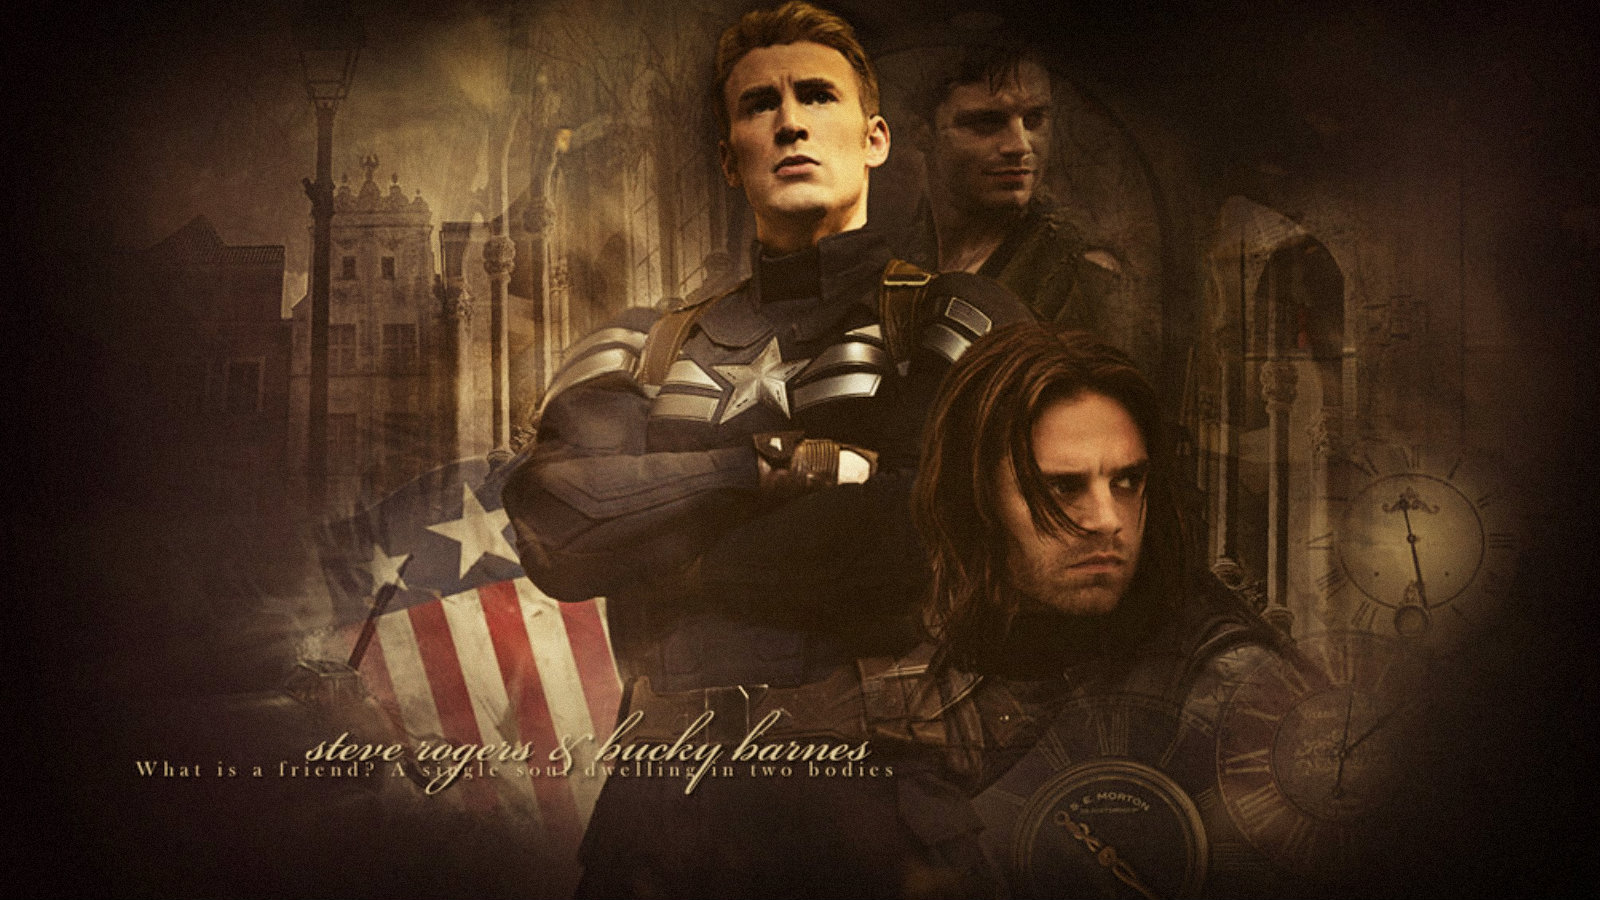 The Winter Soldier Image Captain America Action Film